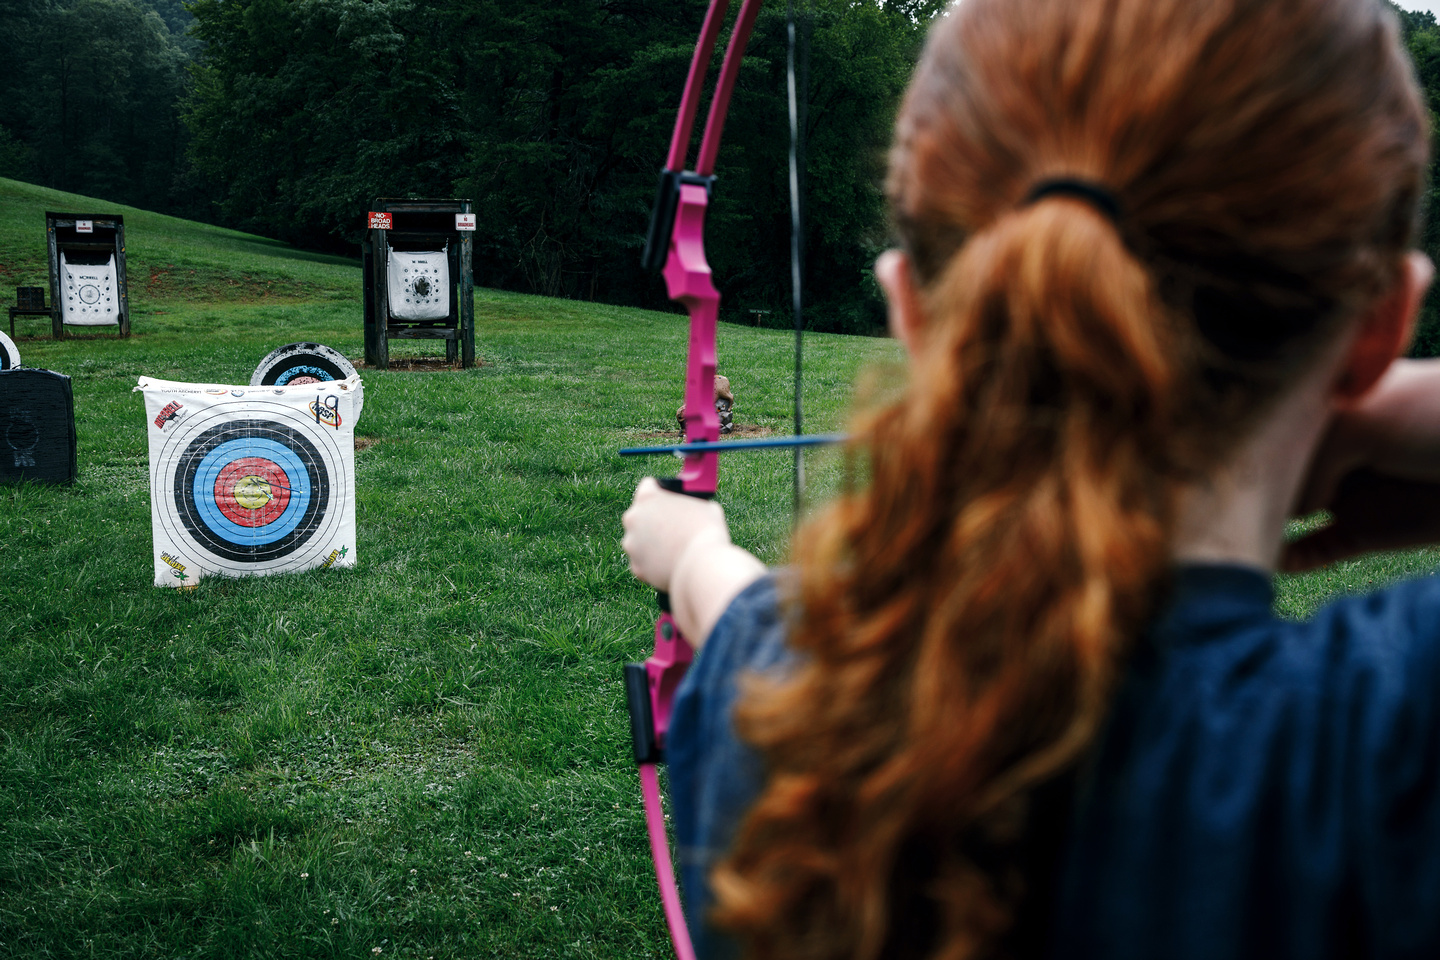 It's a perfect time to introduce your kids to archery. Here's 3